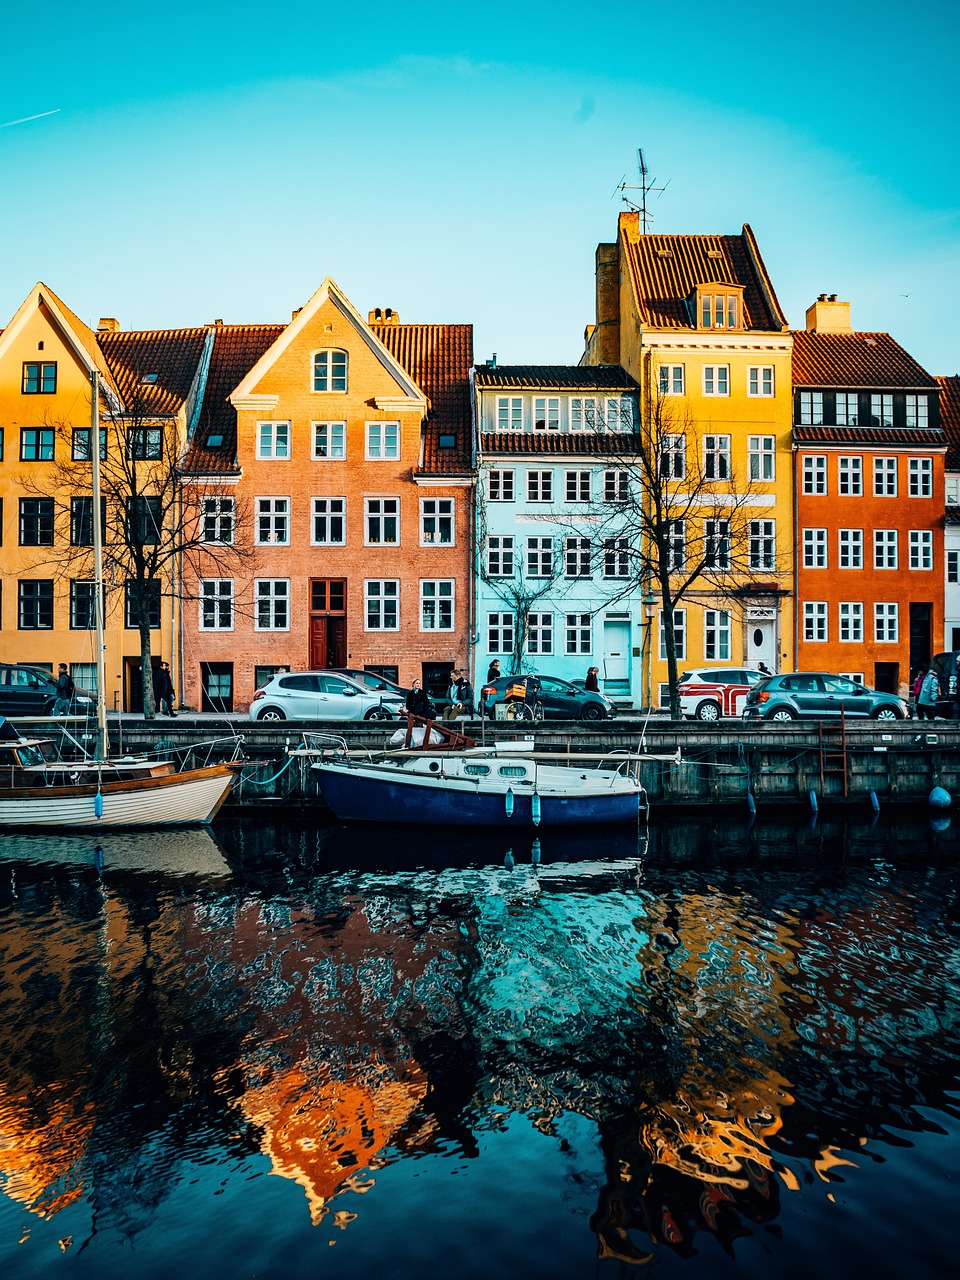 Medieval Castles and Culinary Delights in Copenhagen